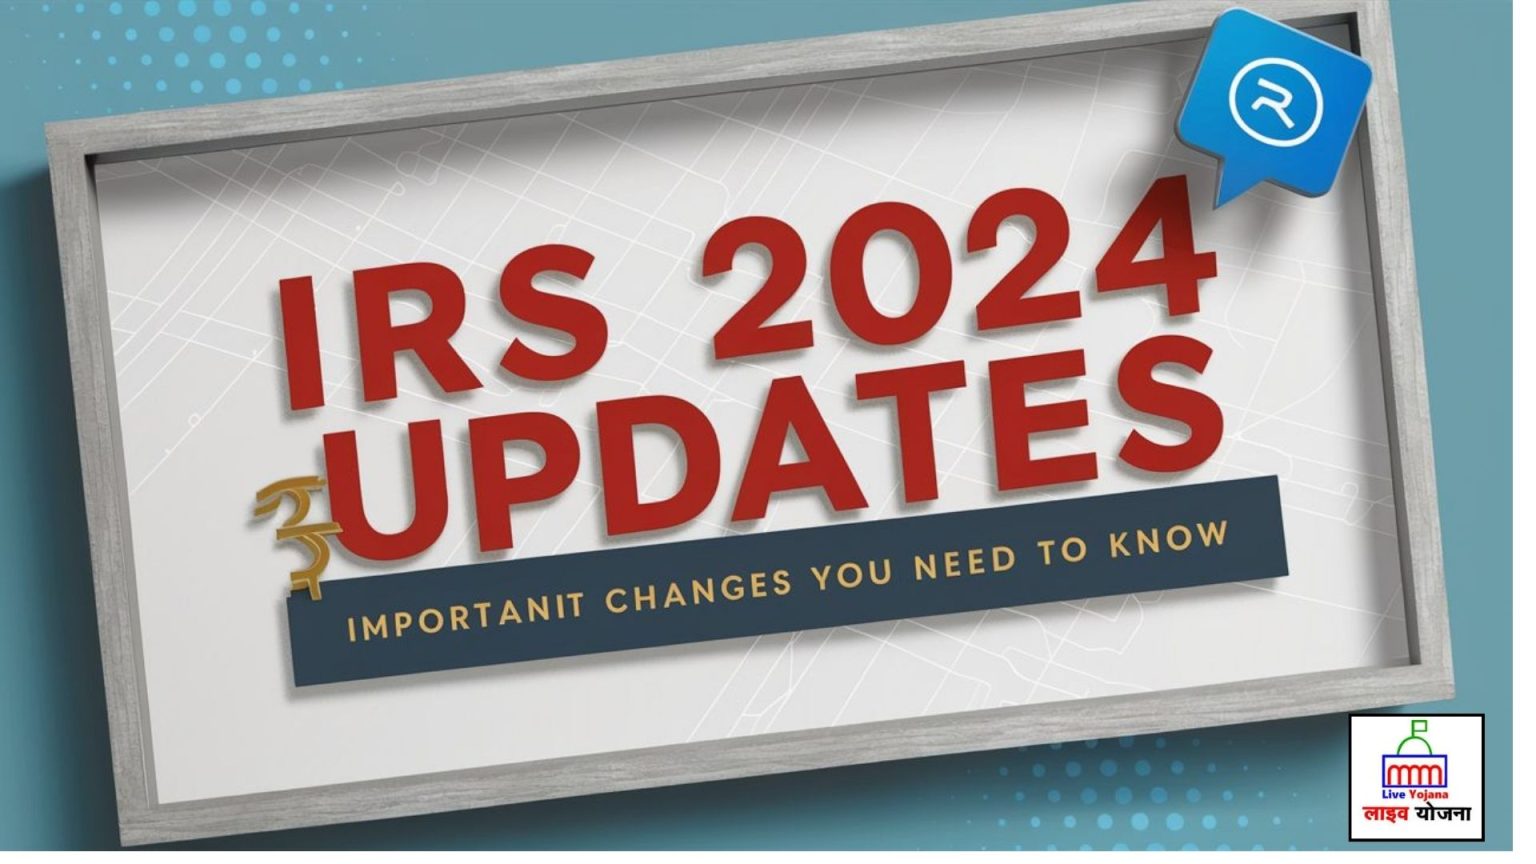 IRS 2024 Updates Insights on Refunds, Child Tax Credit, and SSI